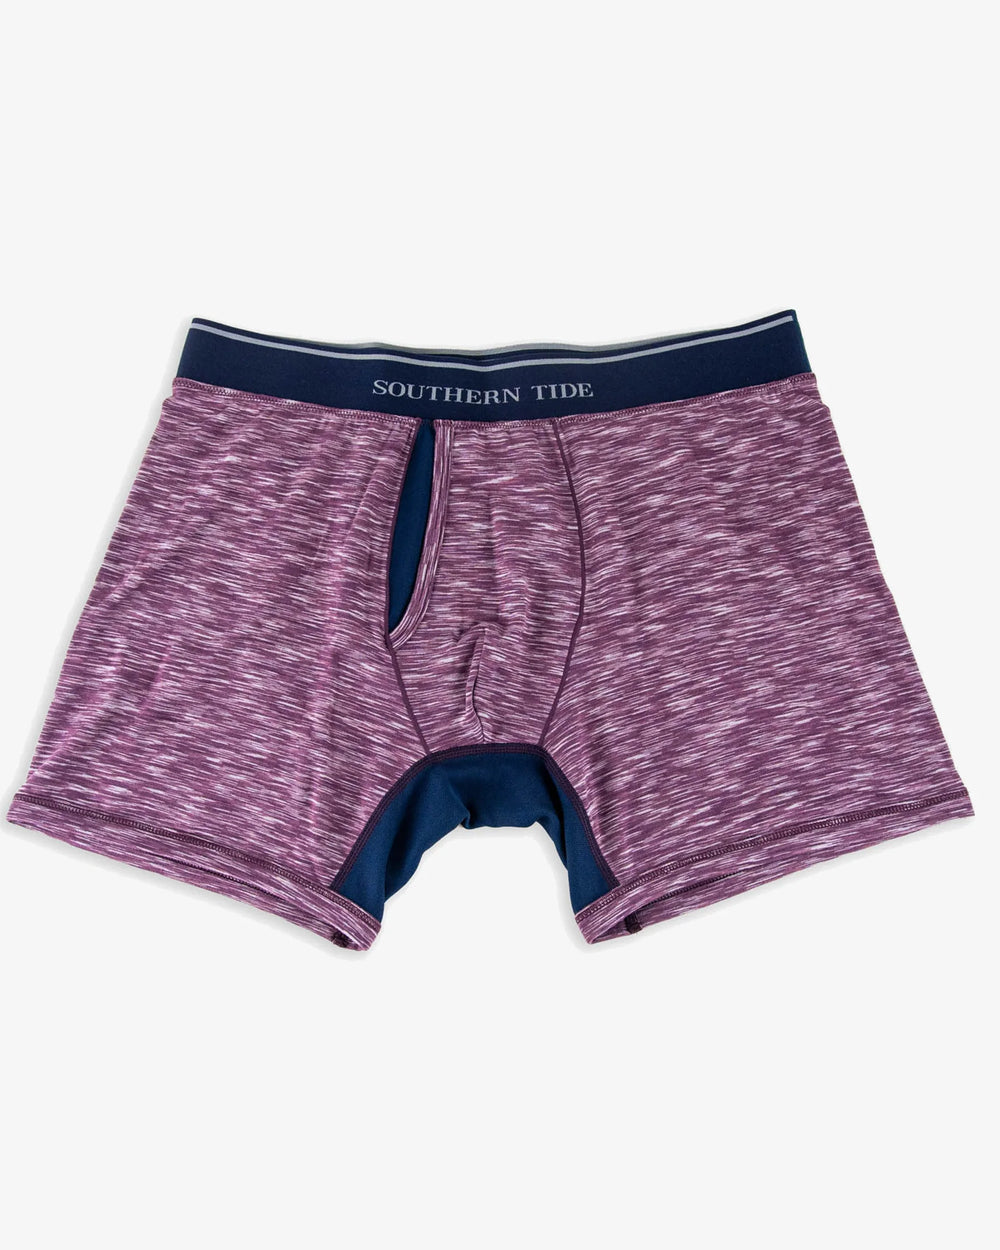 The front view of the Southern Tide Baxter Performance Boxer Brief by Southern Tide - Plum Wine